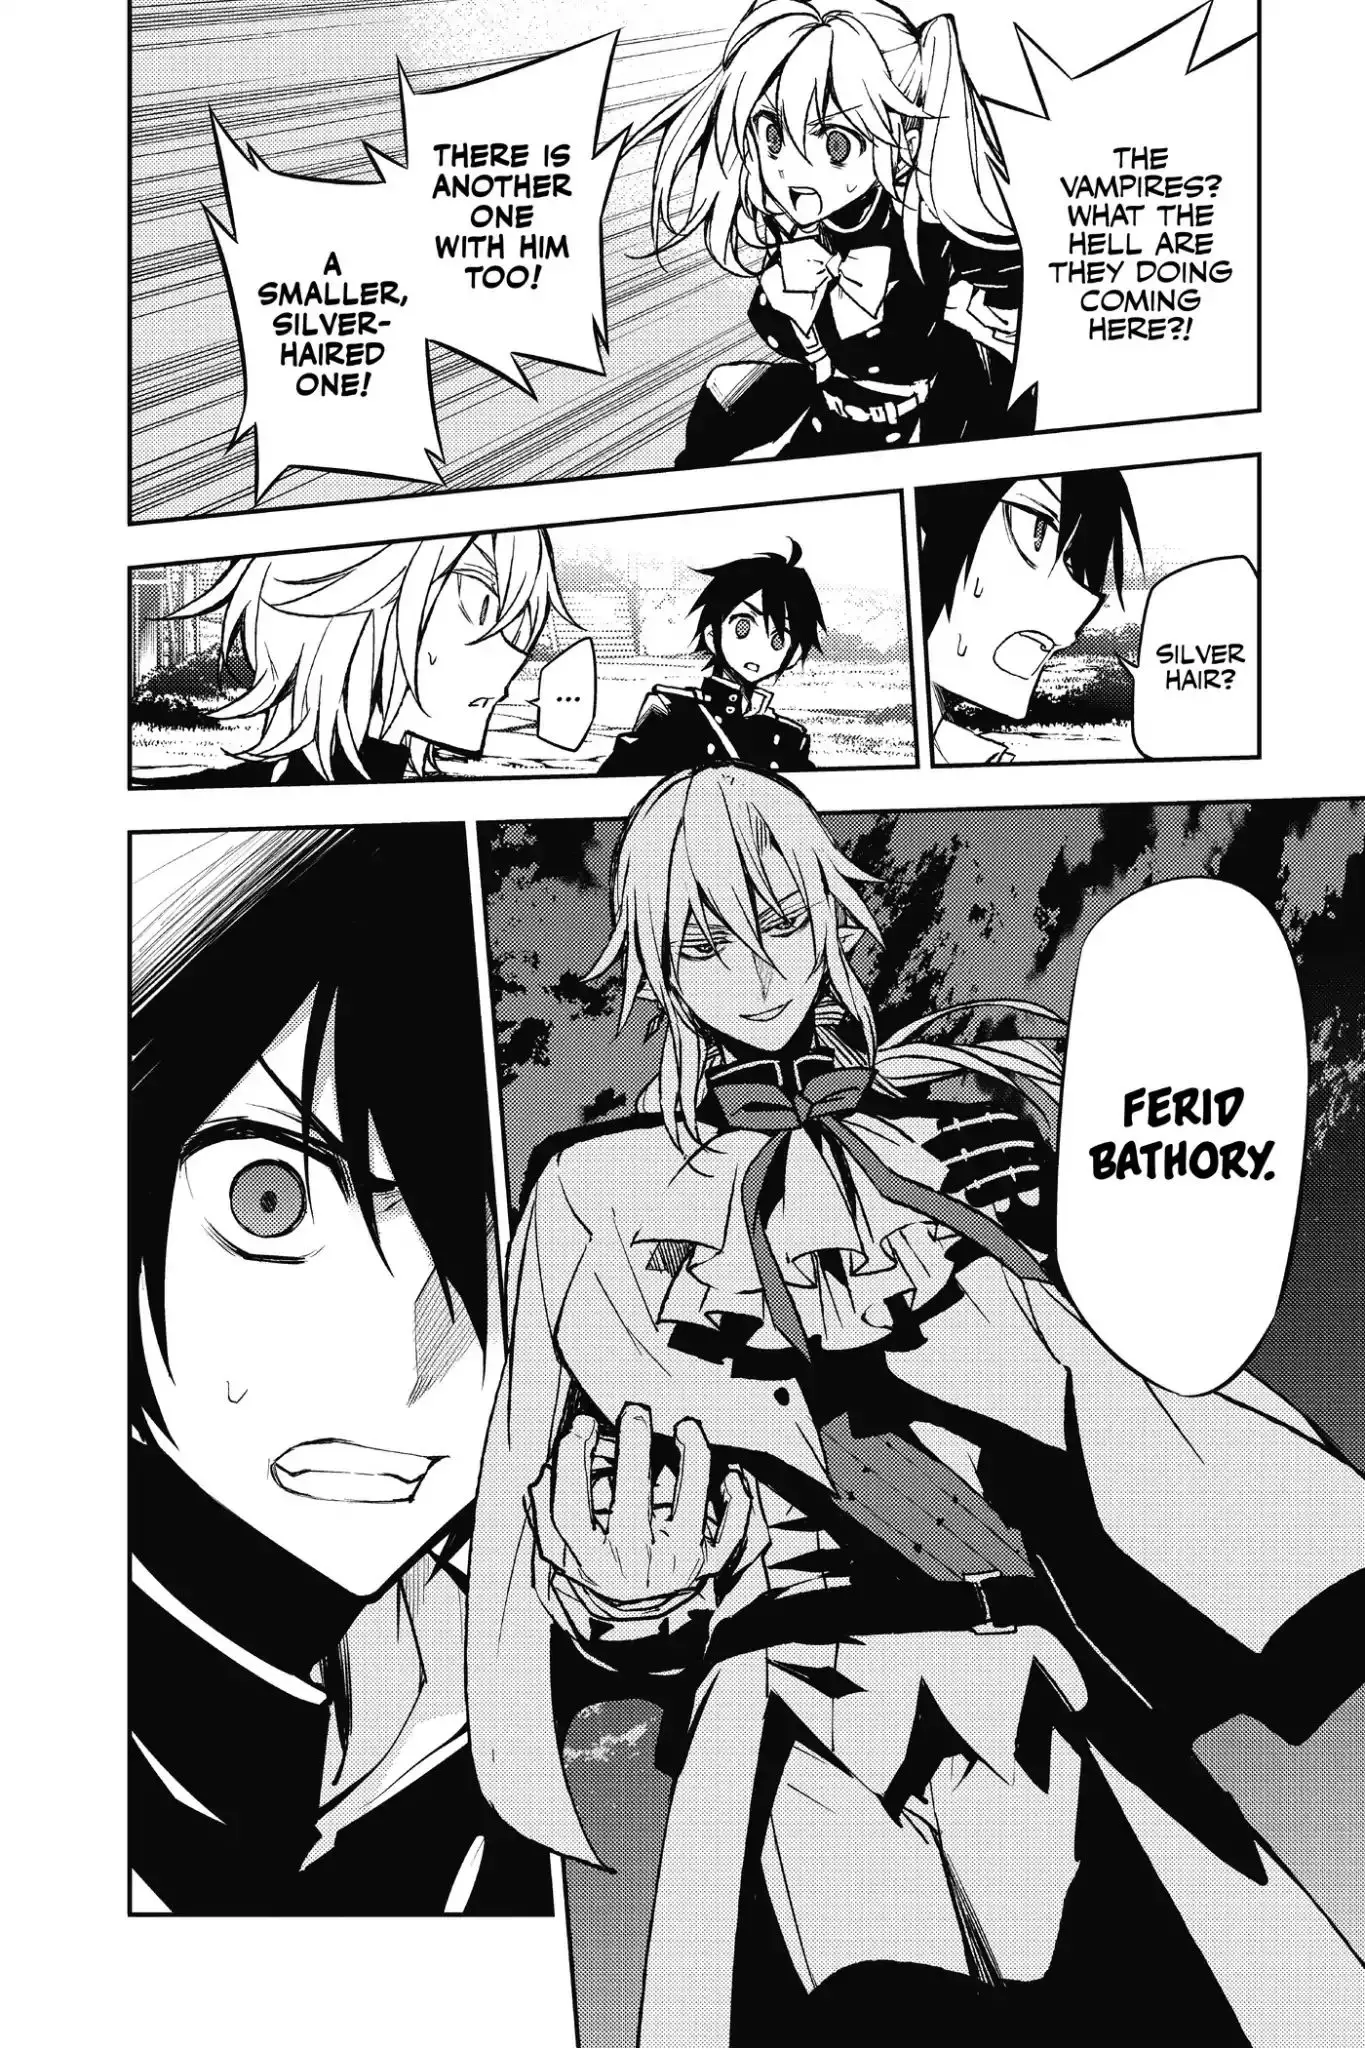 Seraph Of The End - 44 page 23-24d3f743